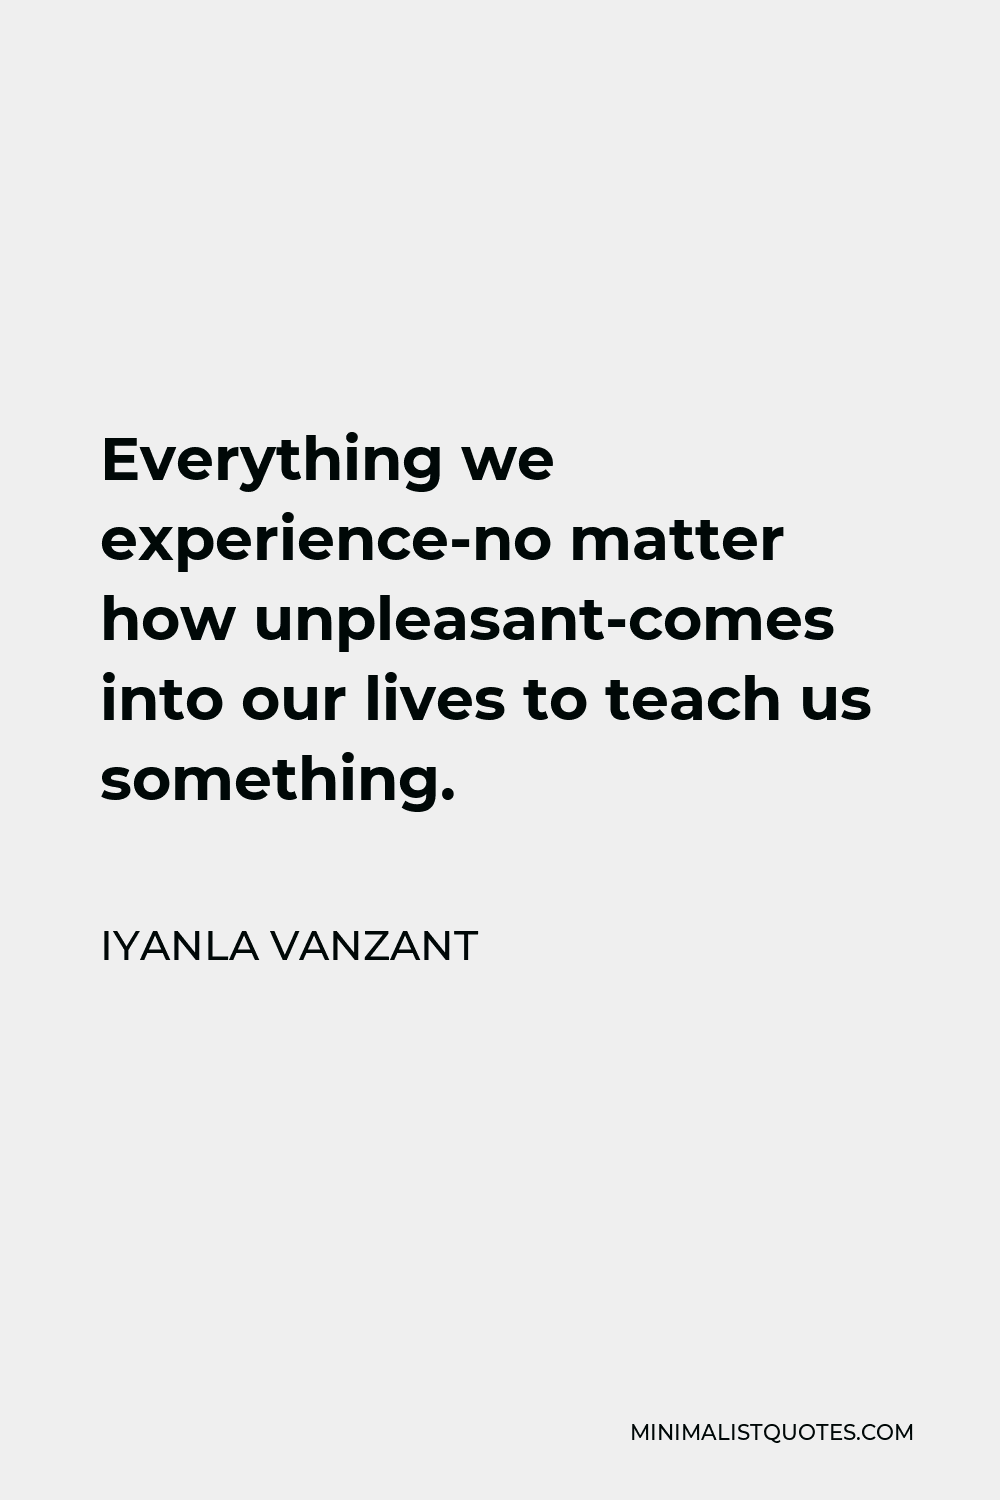 Iyanla Vanzant Quote - Everything we experience-no matter how unpleasant-comes into our lives to teach us something.